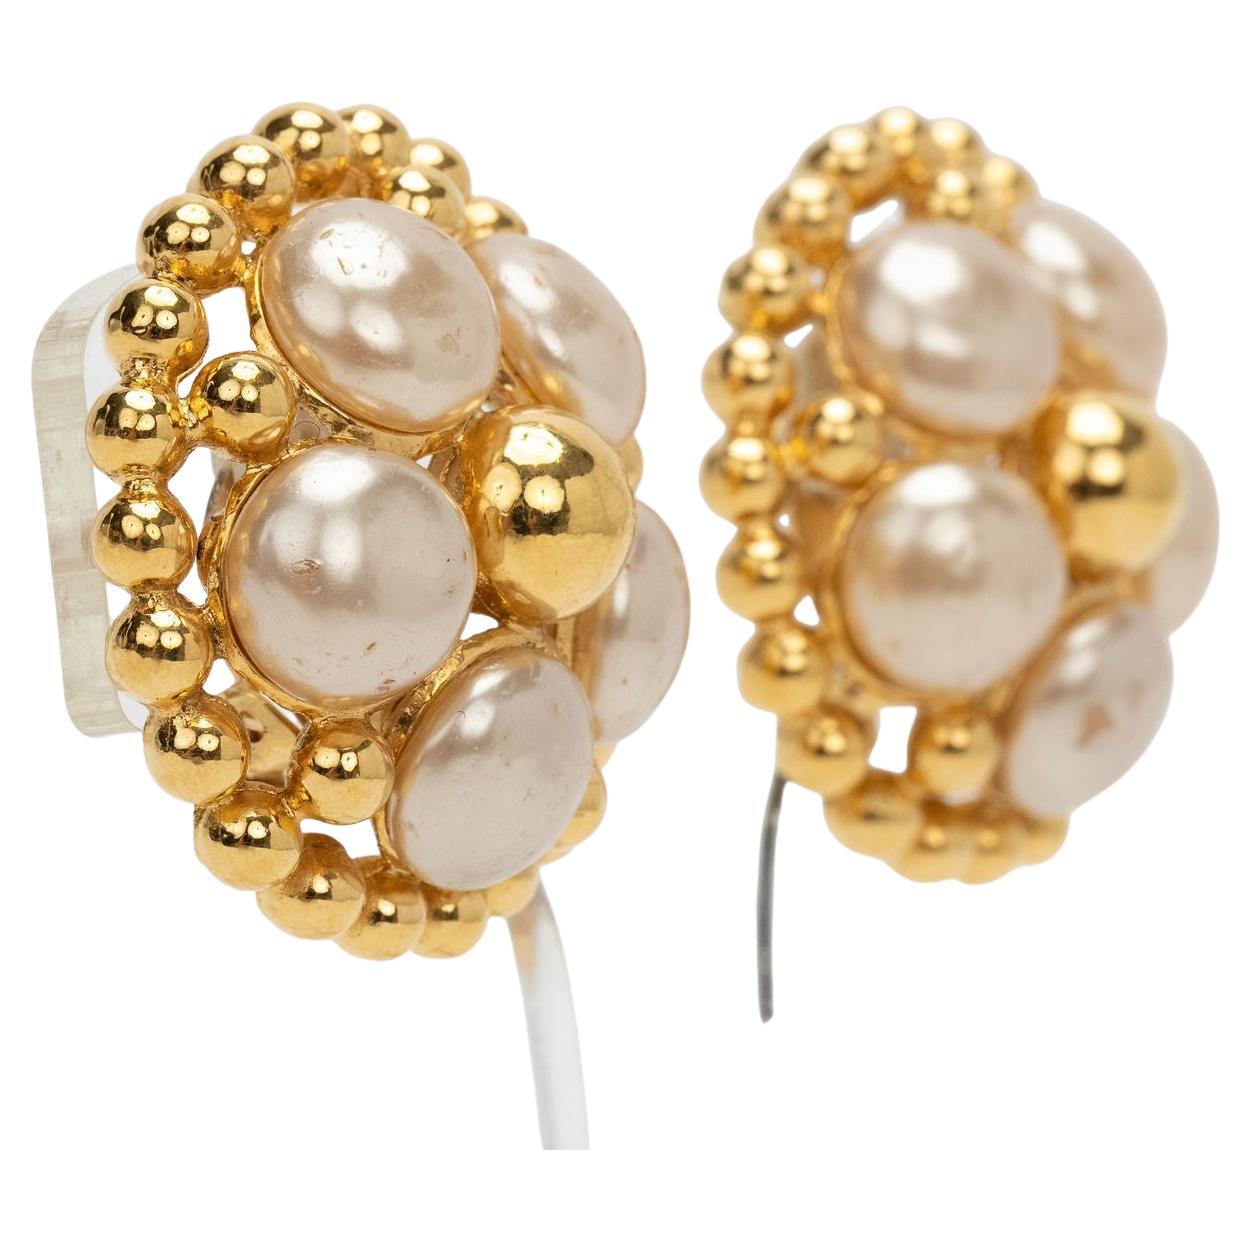 Chanel 80s Vintage Earrings in form of a flower with pearls being the leaves. Collection 25 by Victoire de Castellaine. Minor wear on one pearl, please refer to photos. In excellent condition.